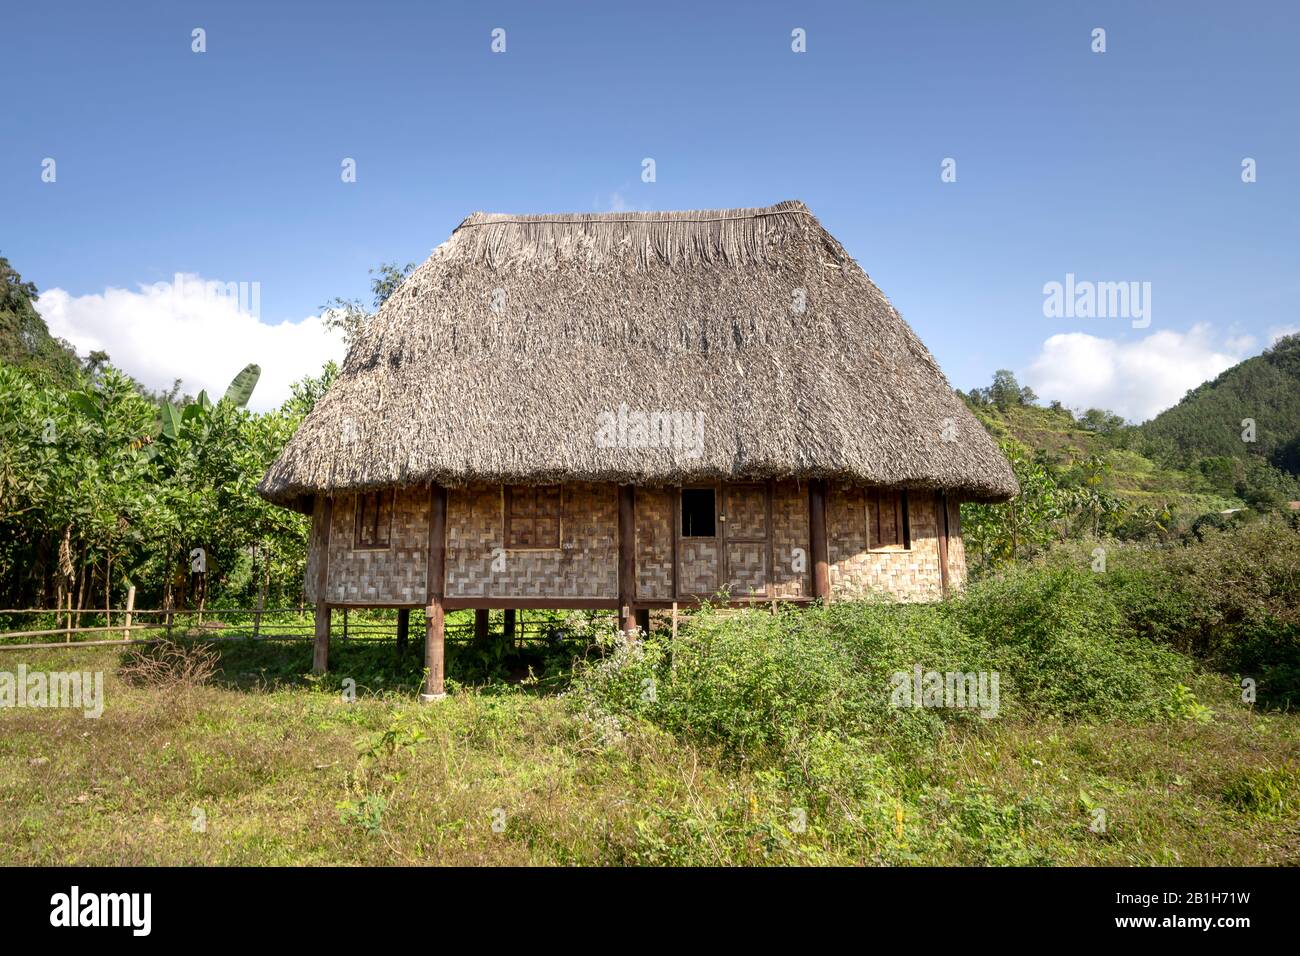 Thua Thien Hue Province, Vietnam - January 12, 2020: Photos of communal houses of ethnic minorities in Thua Thien Hue Province, Vietnam. The communal Stock Photo